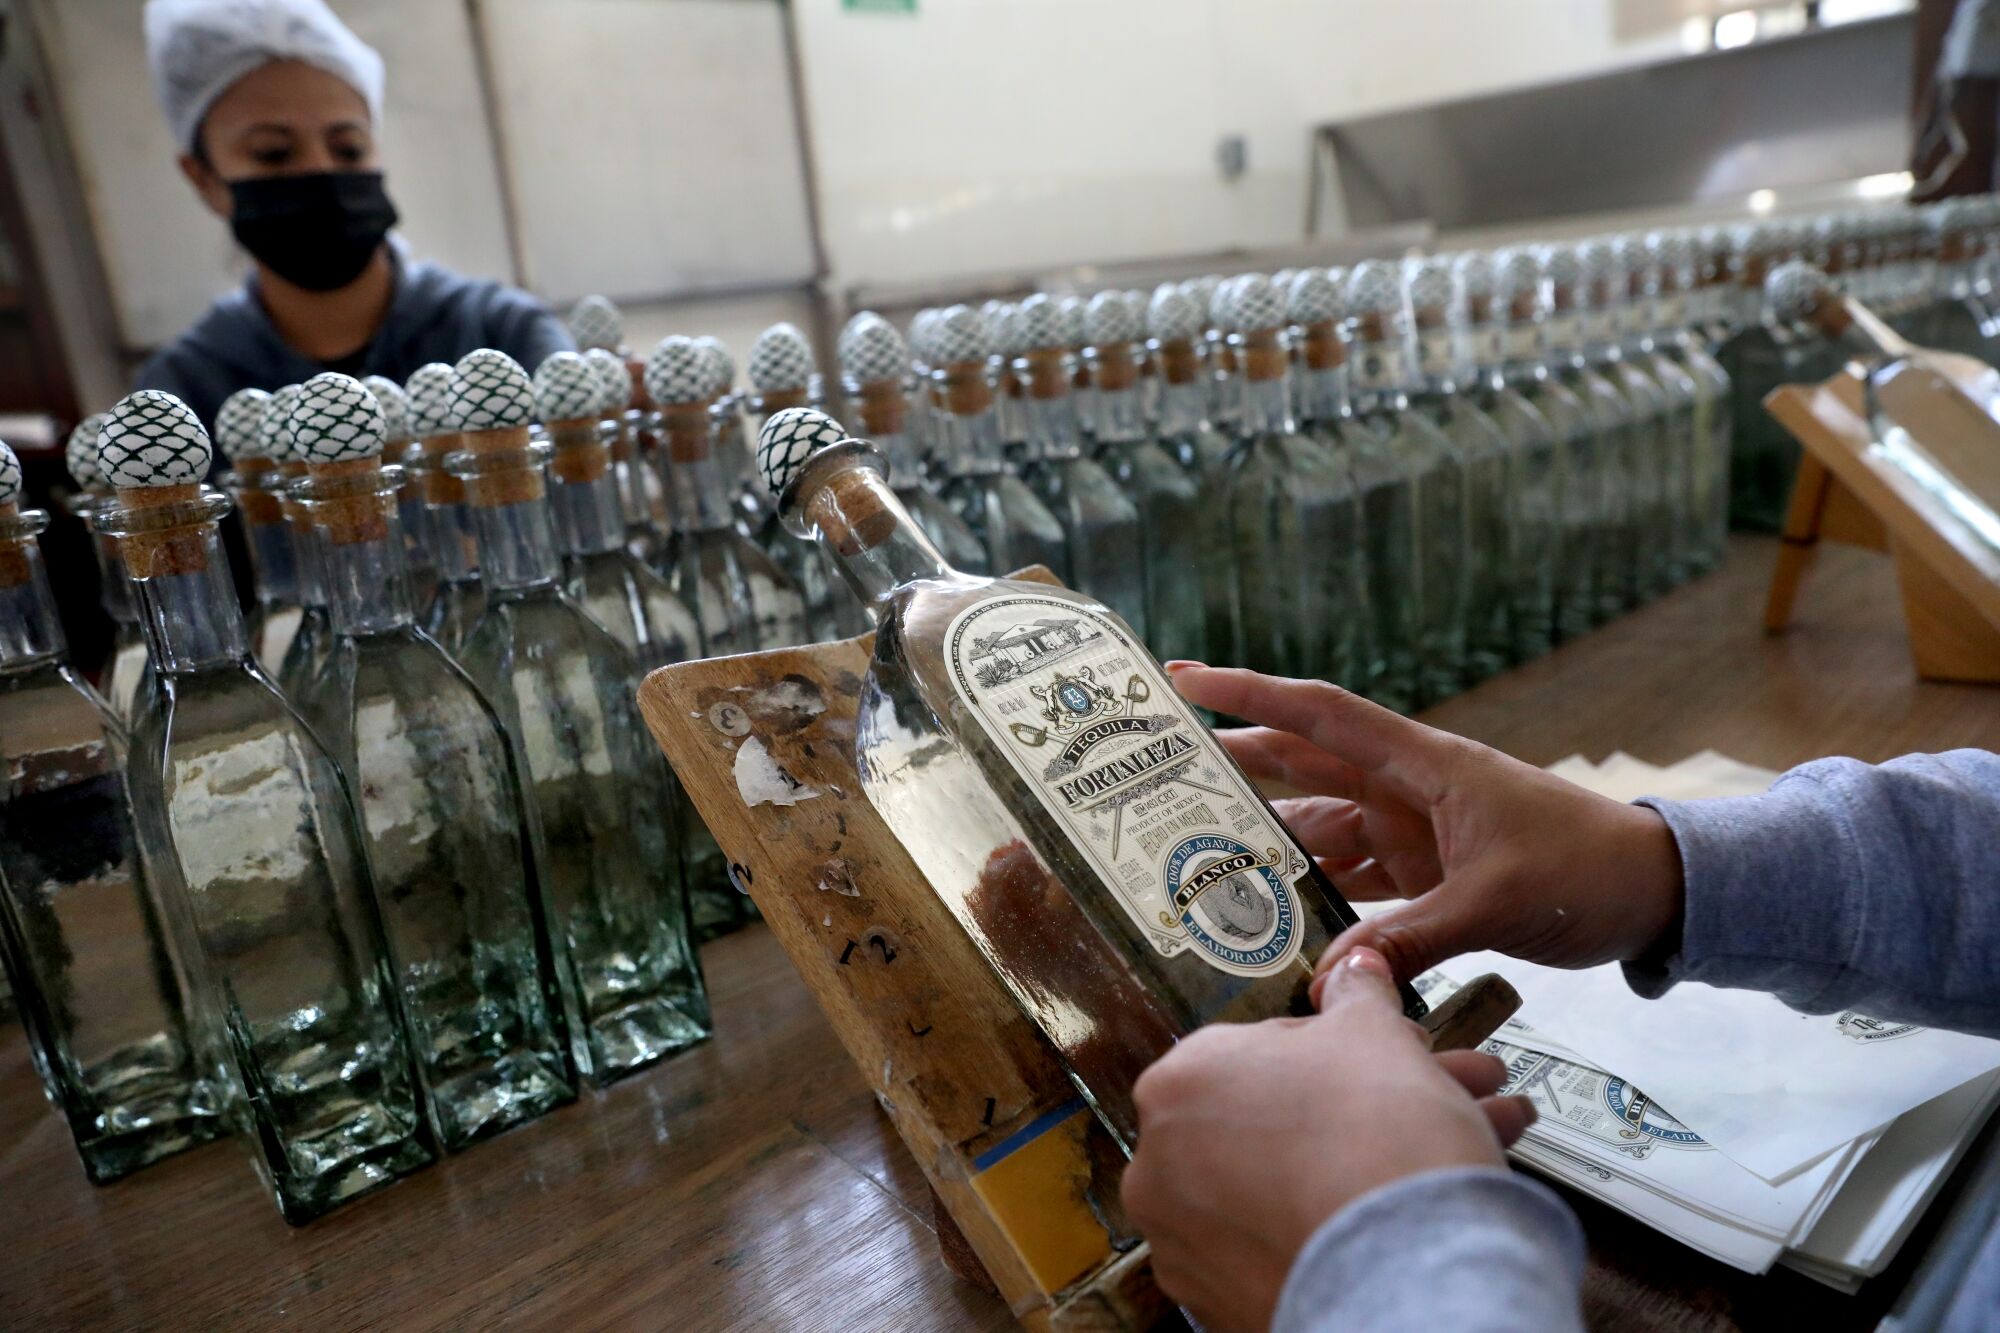 Workers place labels by hand on bottles of tequila